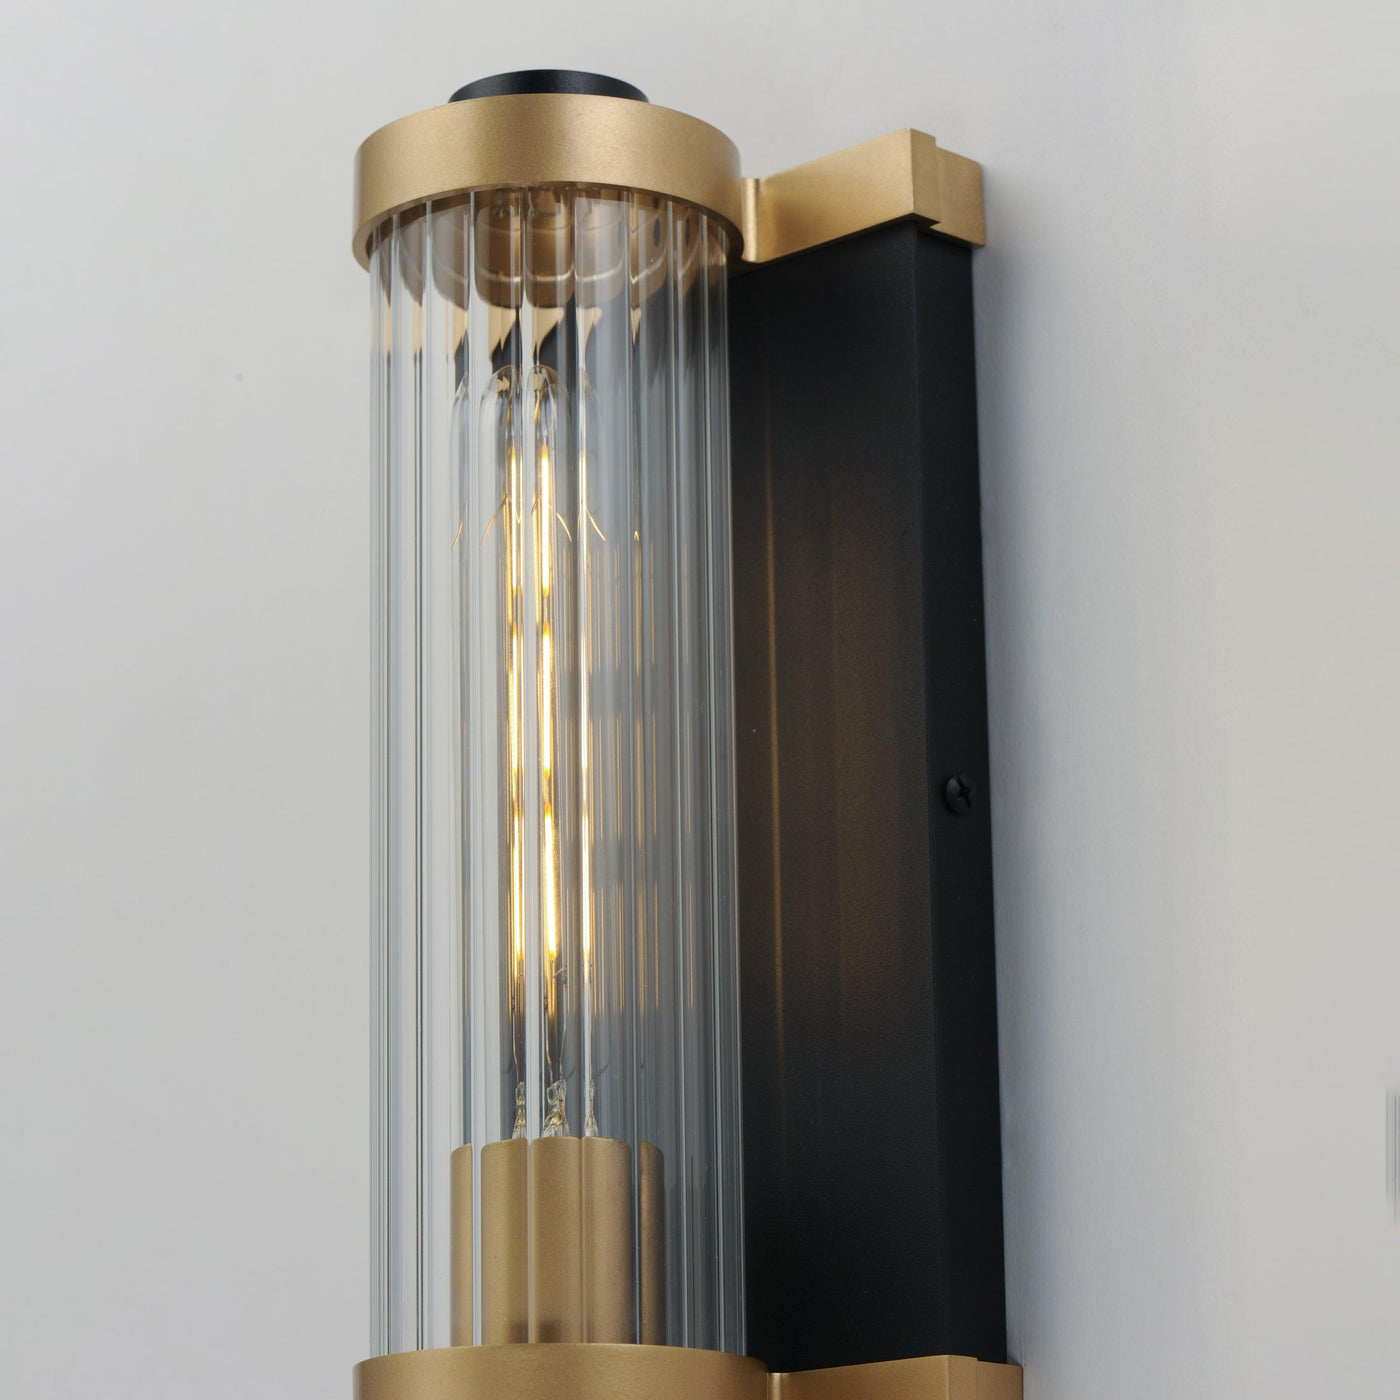 Black and Antique Brass Frame with Clear Cylindrical Glass Shade Outdoor Wall Sconce - LV LIGHTING